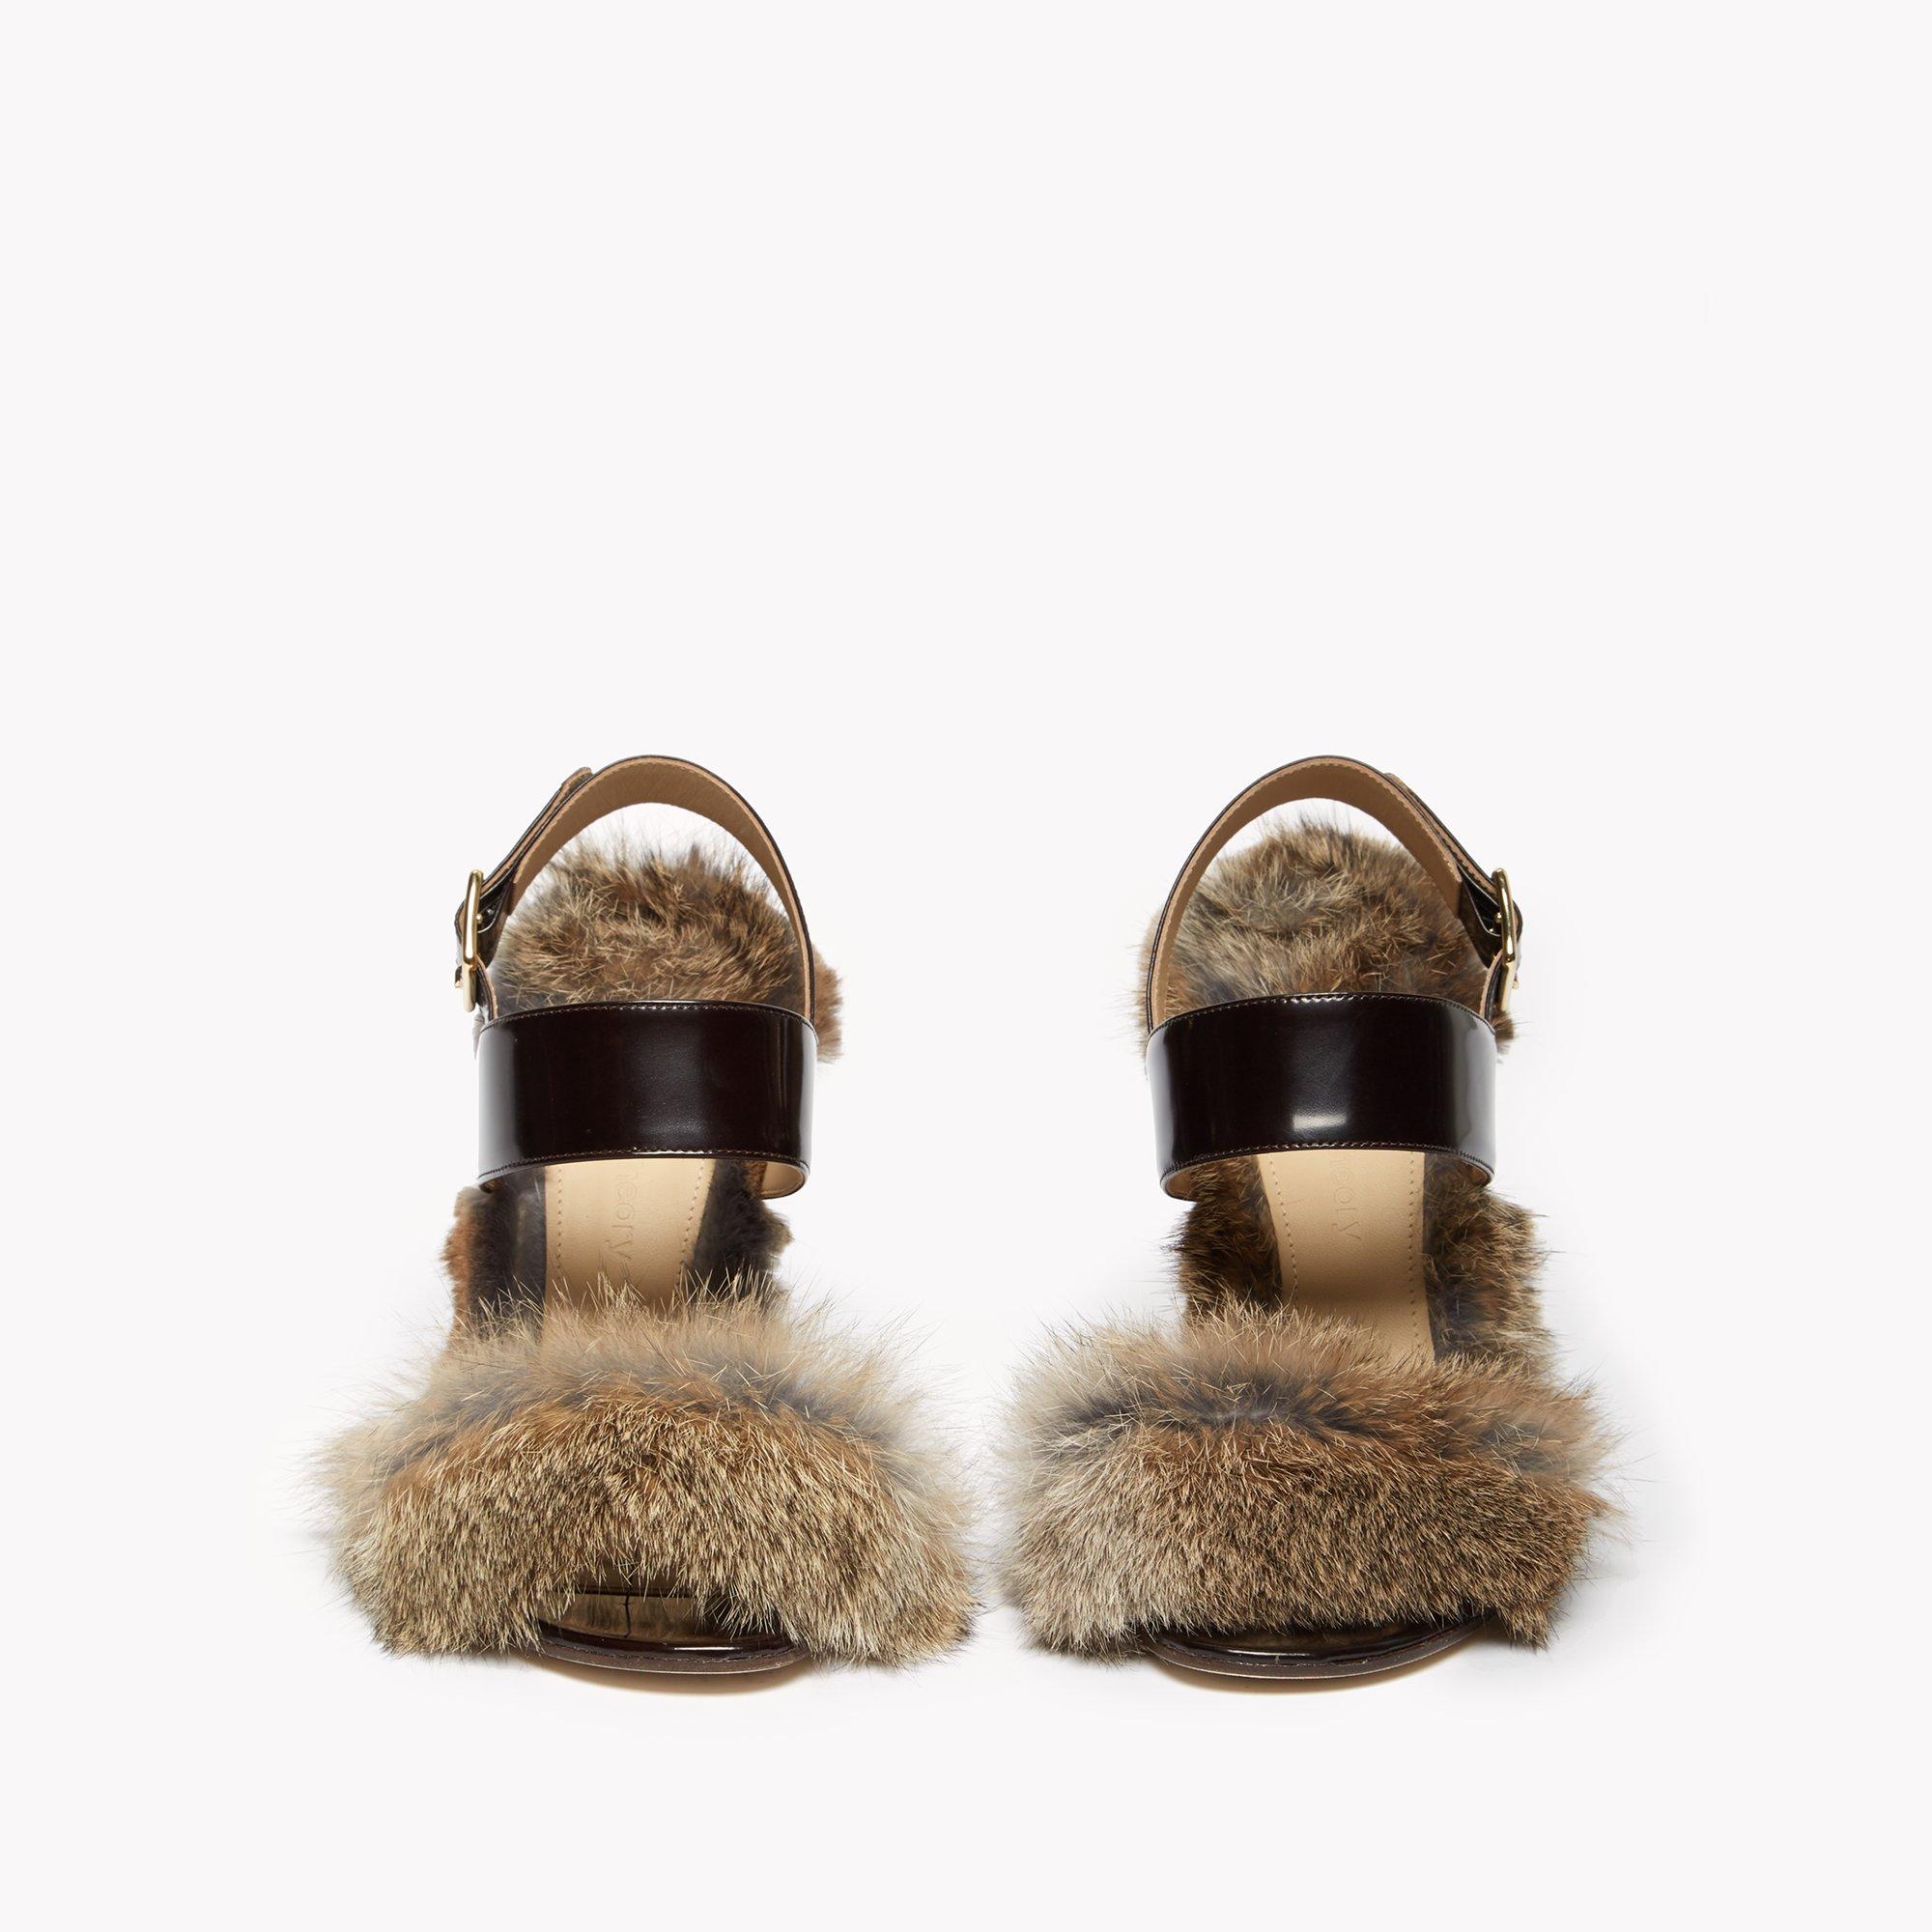 Double Strap Sandal in Spazzalato Leather and Fur